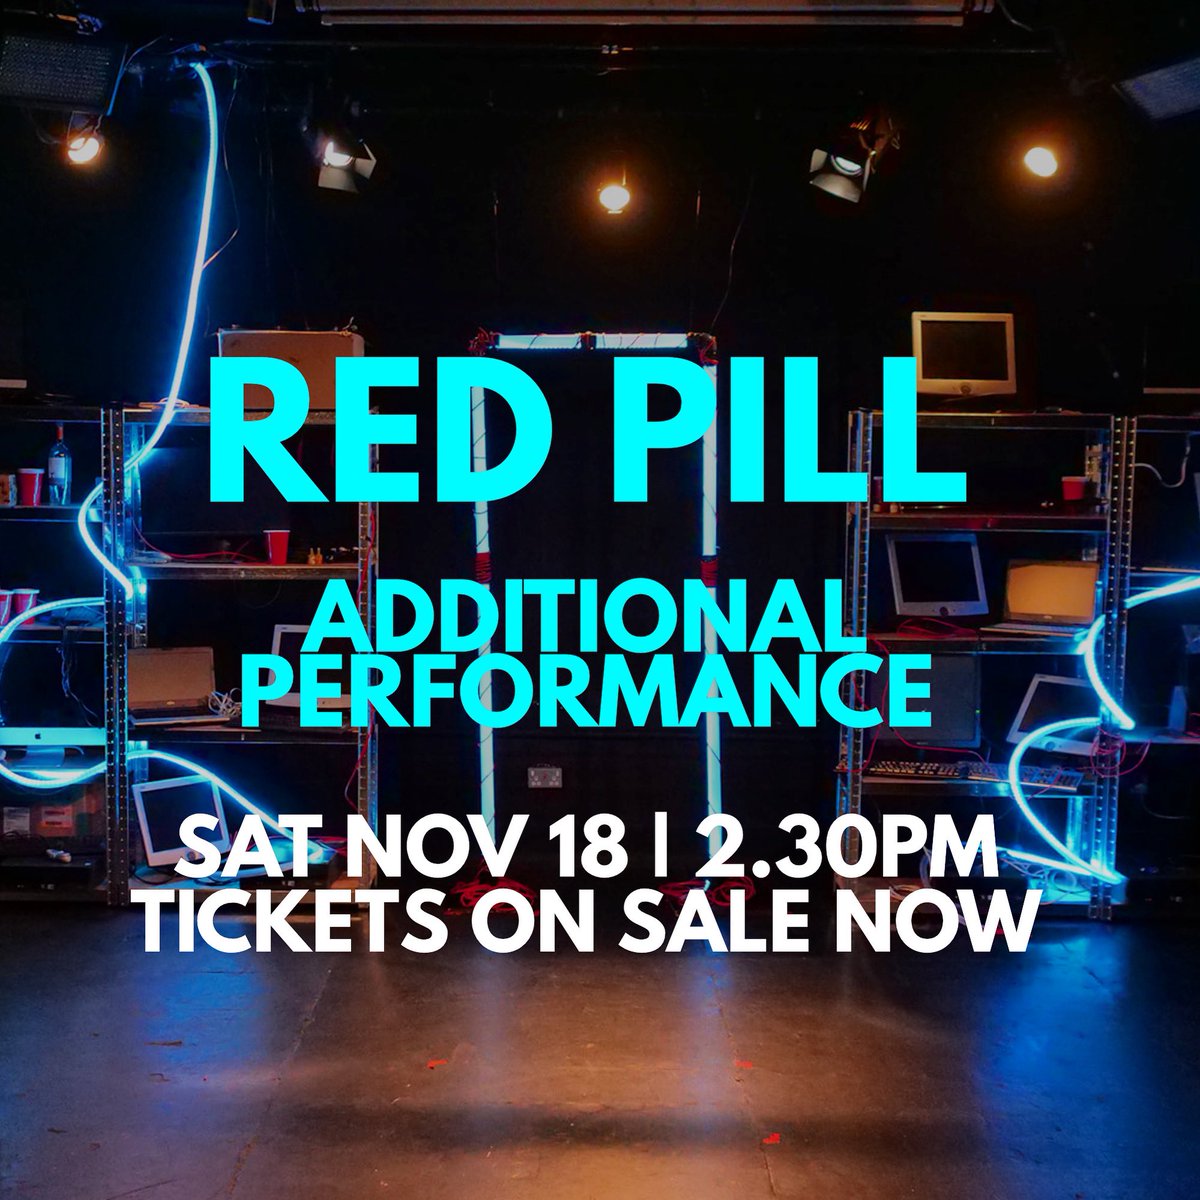 Plans for the weekend? Today we have two performances of #RedPill from @BlueBarProd - a visceral look at the rise of online extremism and the far right. 🎭 Today 2.30 & 7.30pm 🎟️ app.lineupnow.com/event/red-pill…